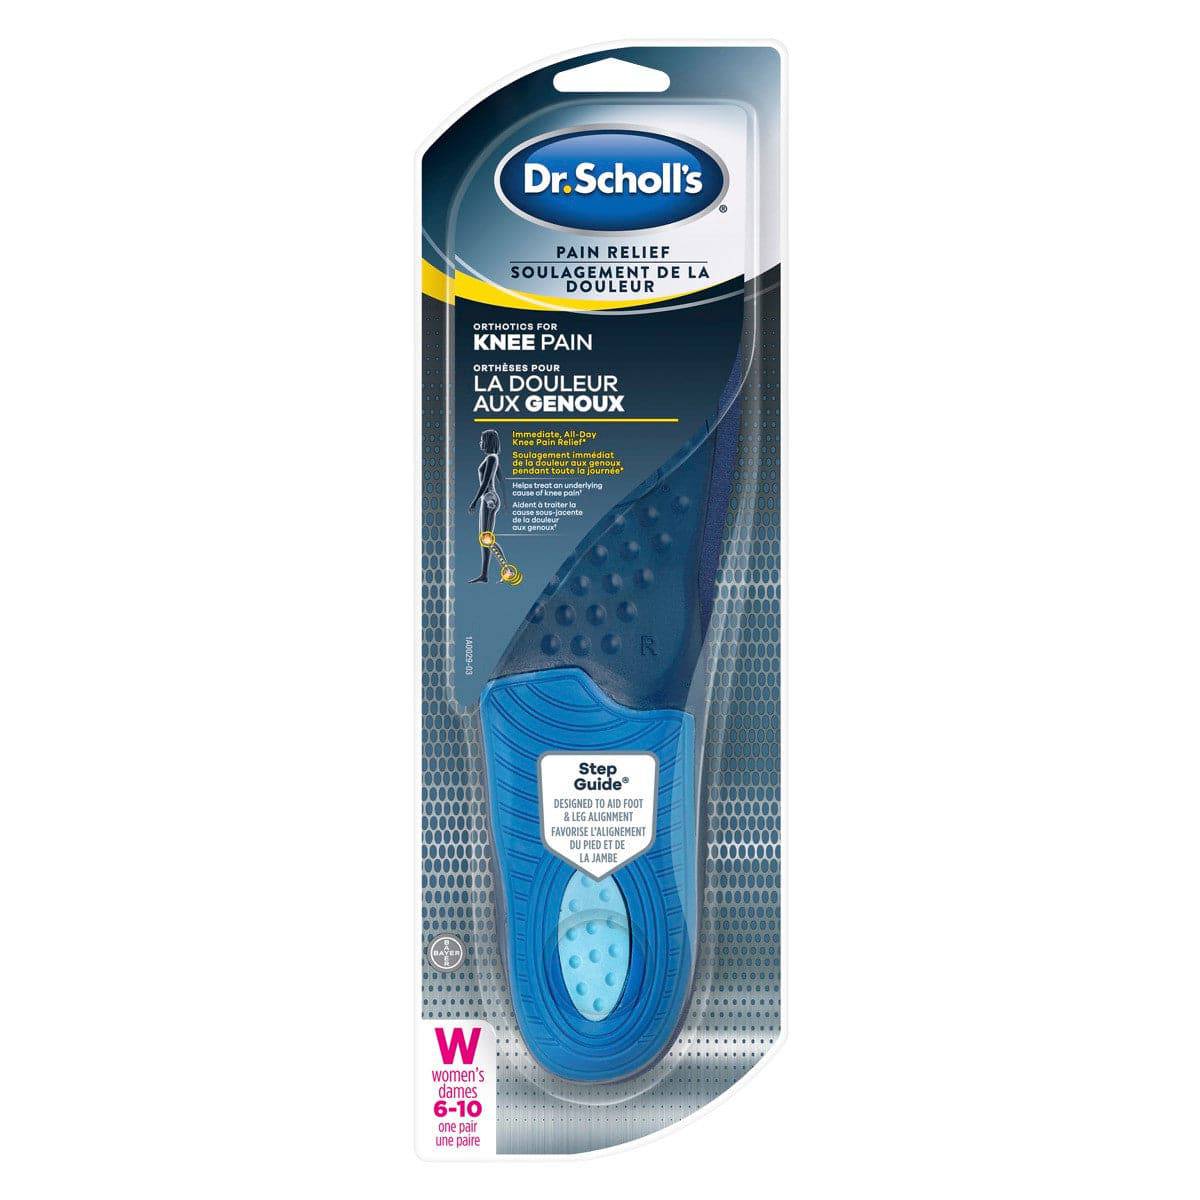 Dr. Scholl’s Pain Relief Orthotics for Arthritis Pain for Women, 1 Pair,  Size 6-10